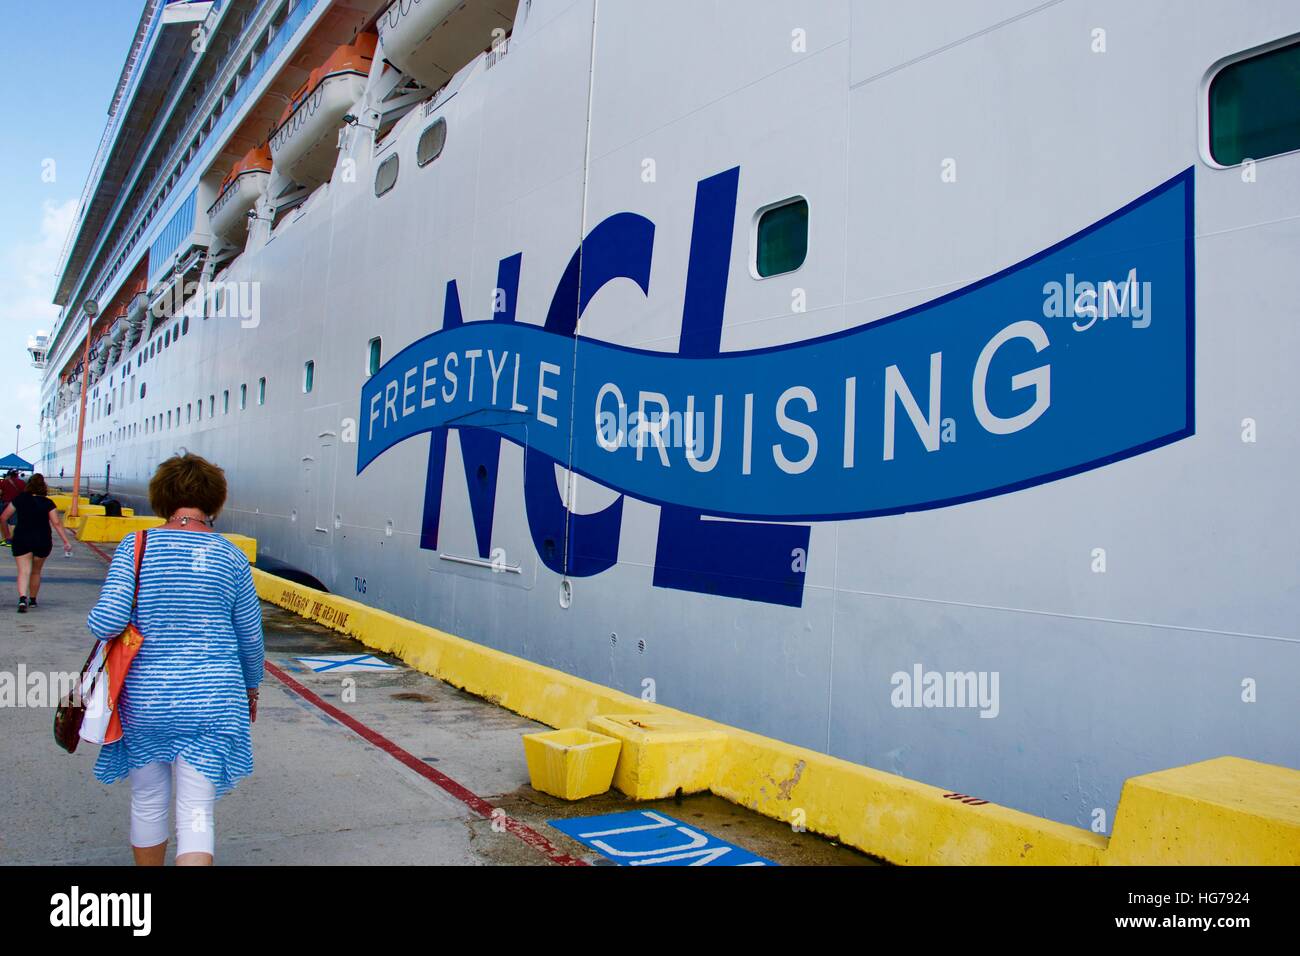 Norwegian Cruise Lines (NCL) Freestyle Cruising side of boat at dock Stock Photo